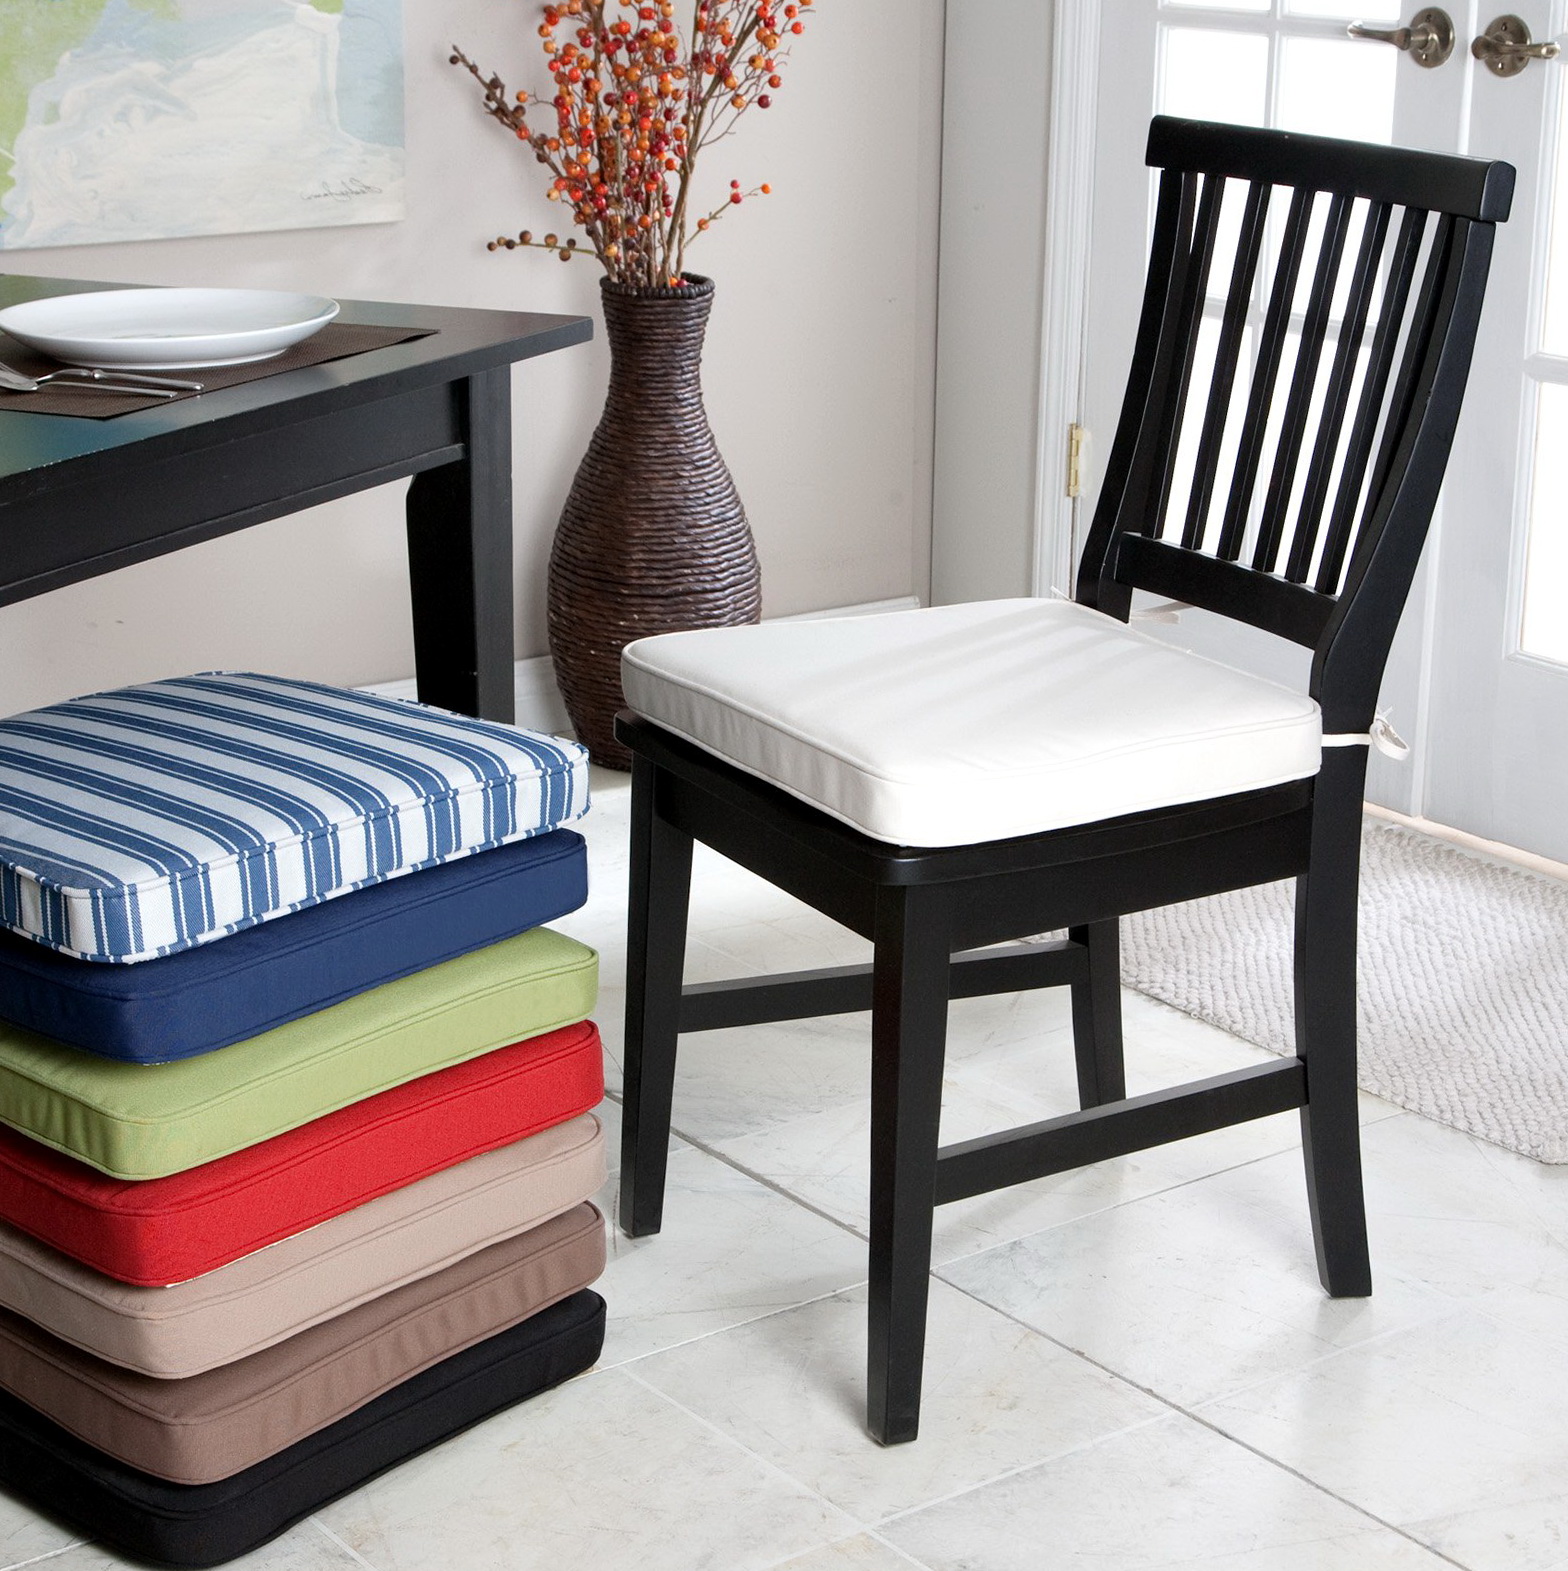 Dining Room <a href='/chair-seat-covers/'>Chair Seat Covers</a> : Probably Terrific Ideal Faux Leather <a href='/armchair-covers/'>Armchair Covers</a> Pics. Dining Room Chair Seat Covers.